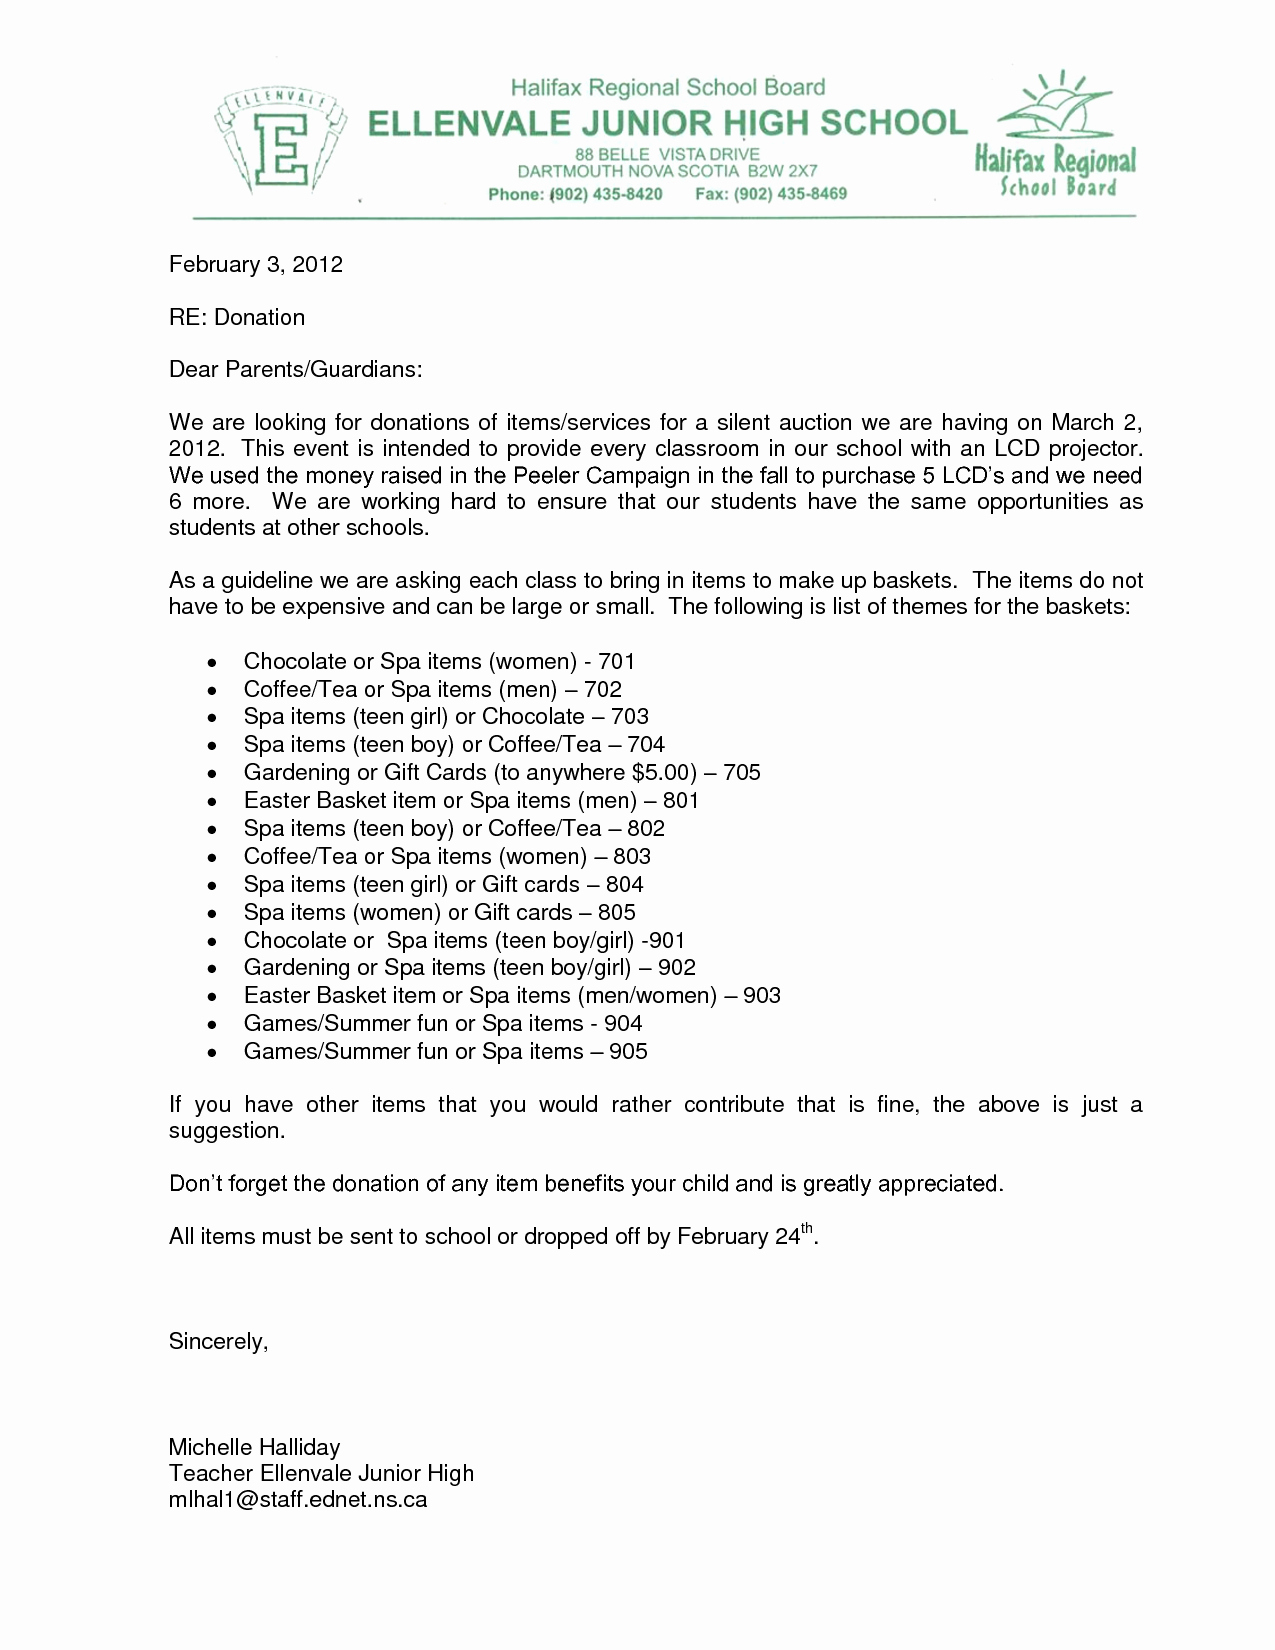 School Donation Request Letter Template - Sample Donation Request Letter for School New Fundraising Thank You